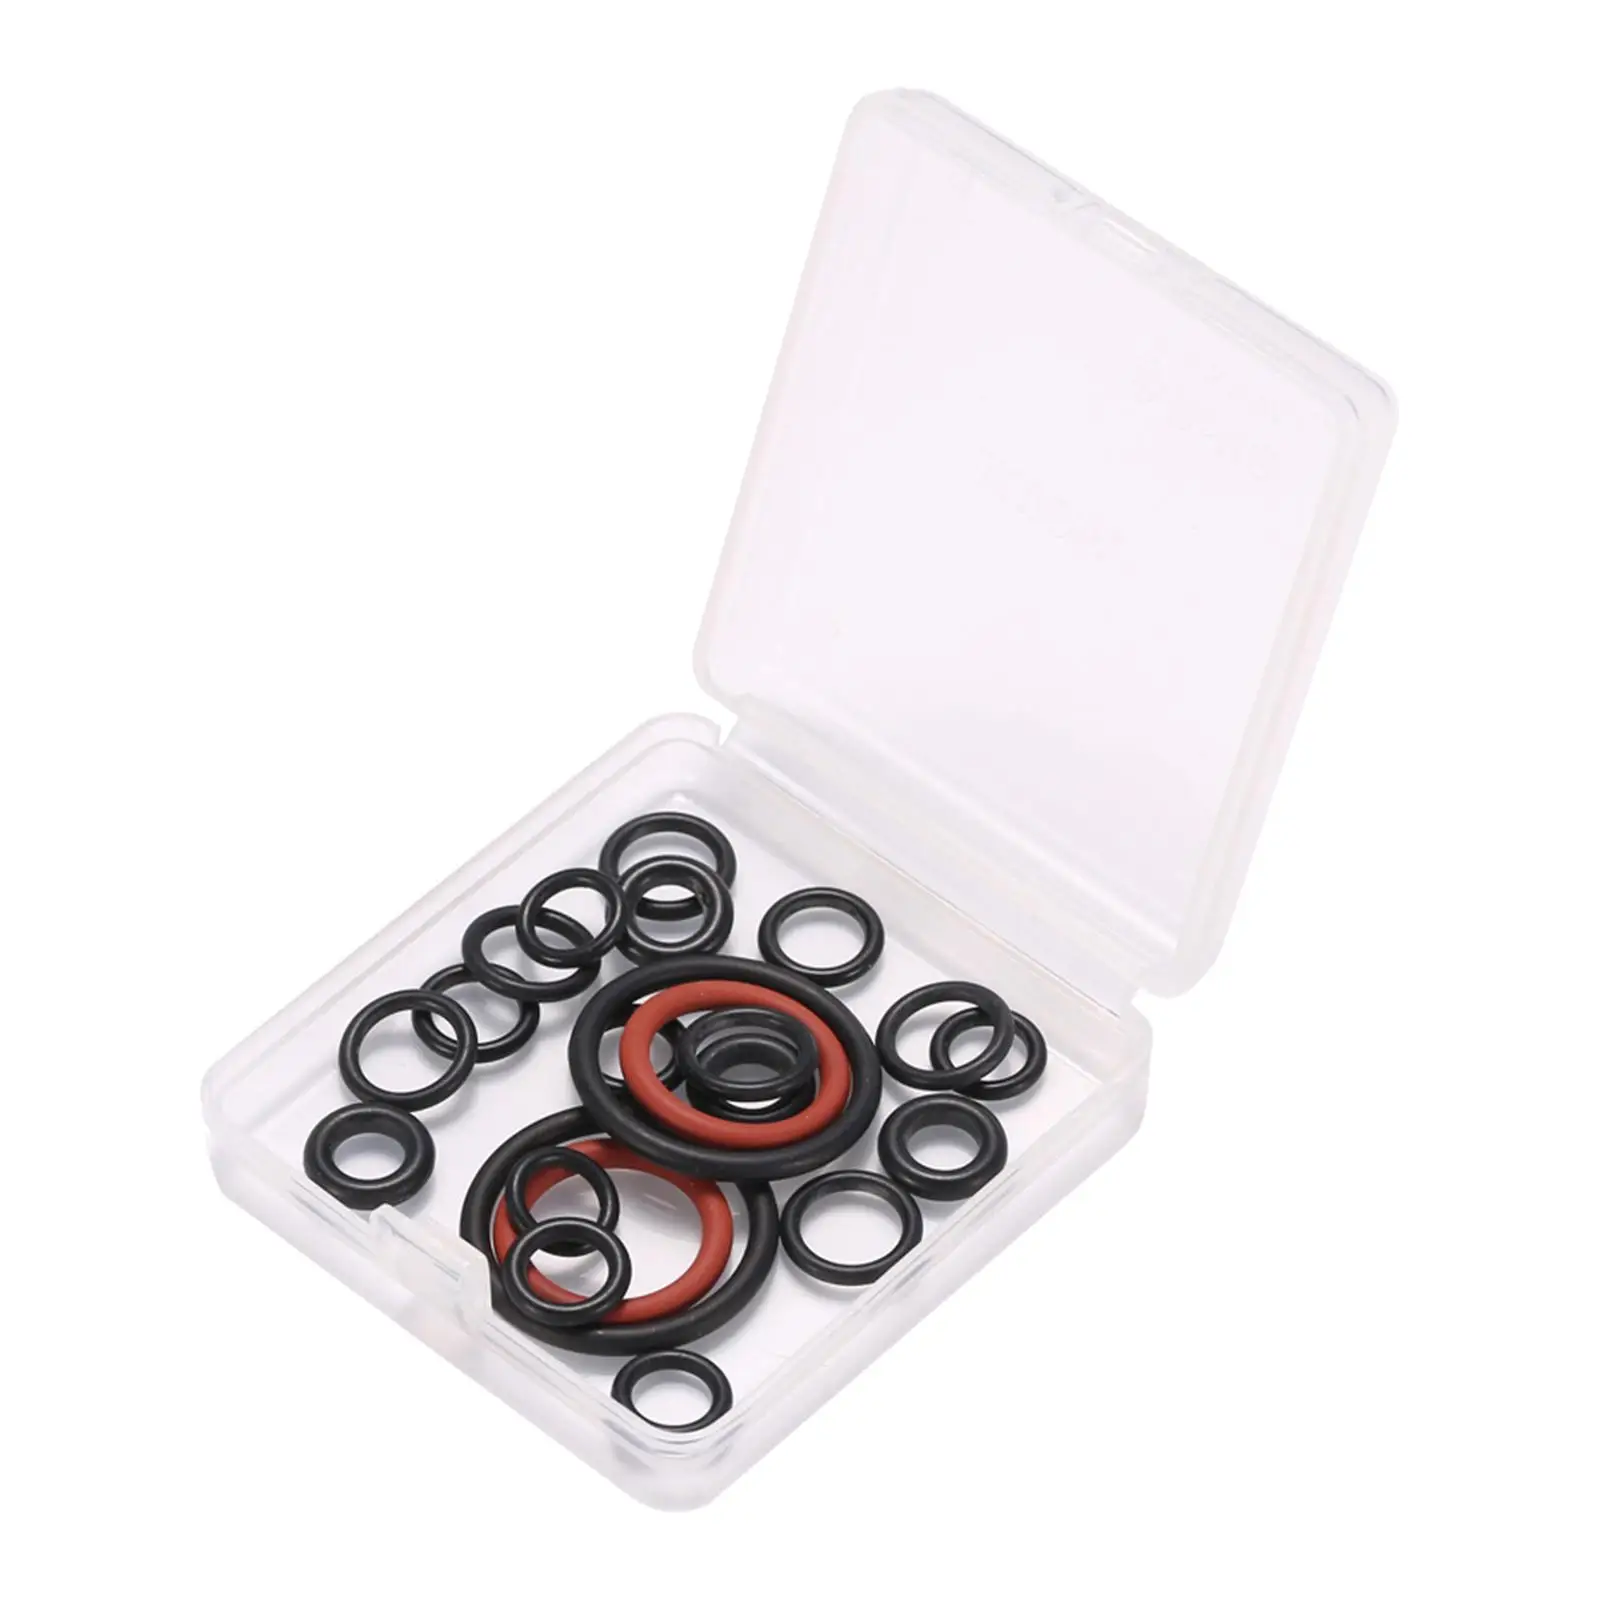 22 piece Sealing Rings Hose Nozzle Seals 2.884-312.0 Gasket Washers for 